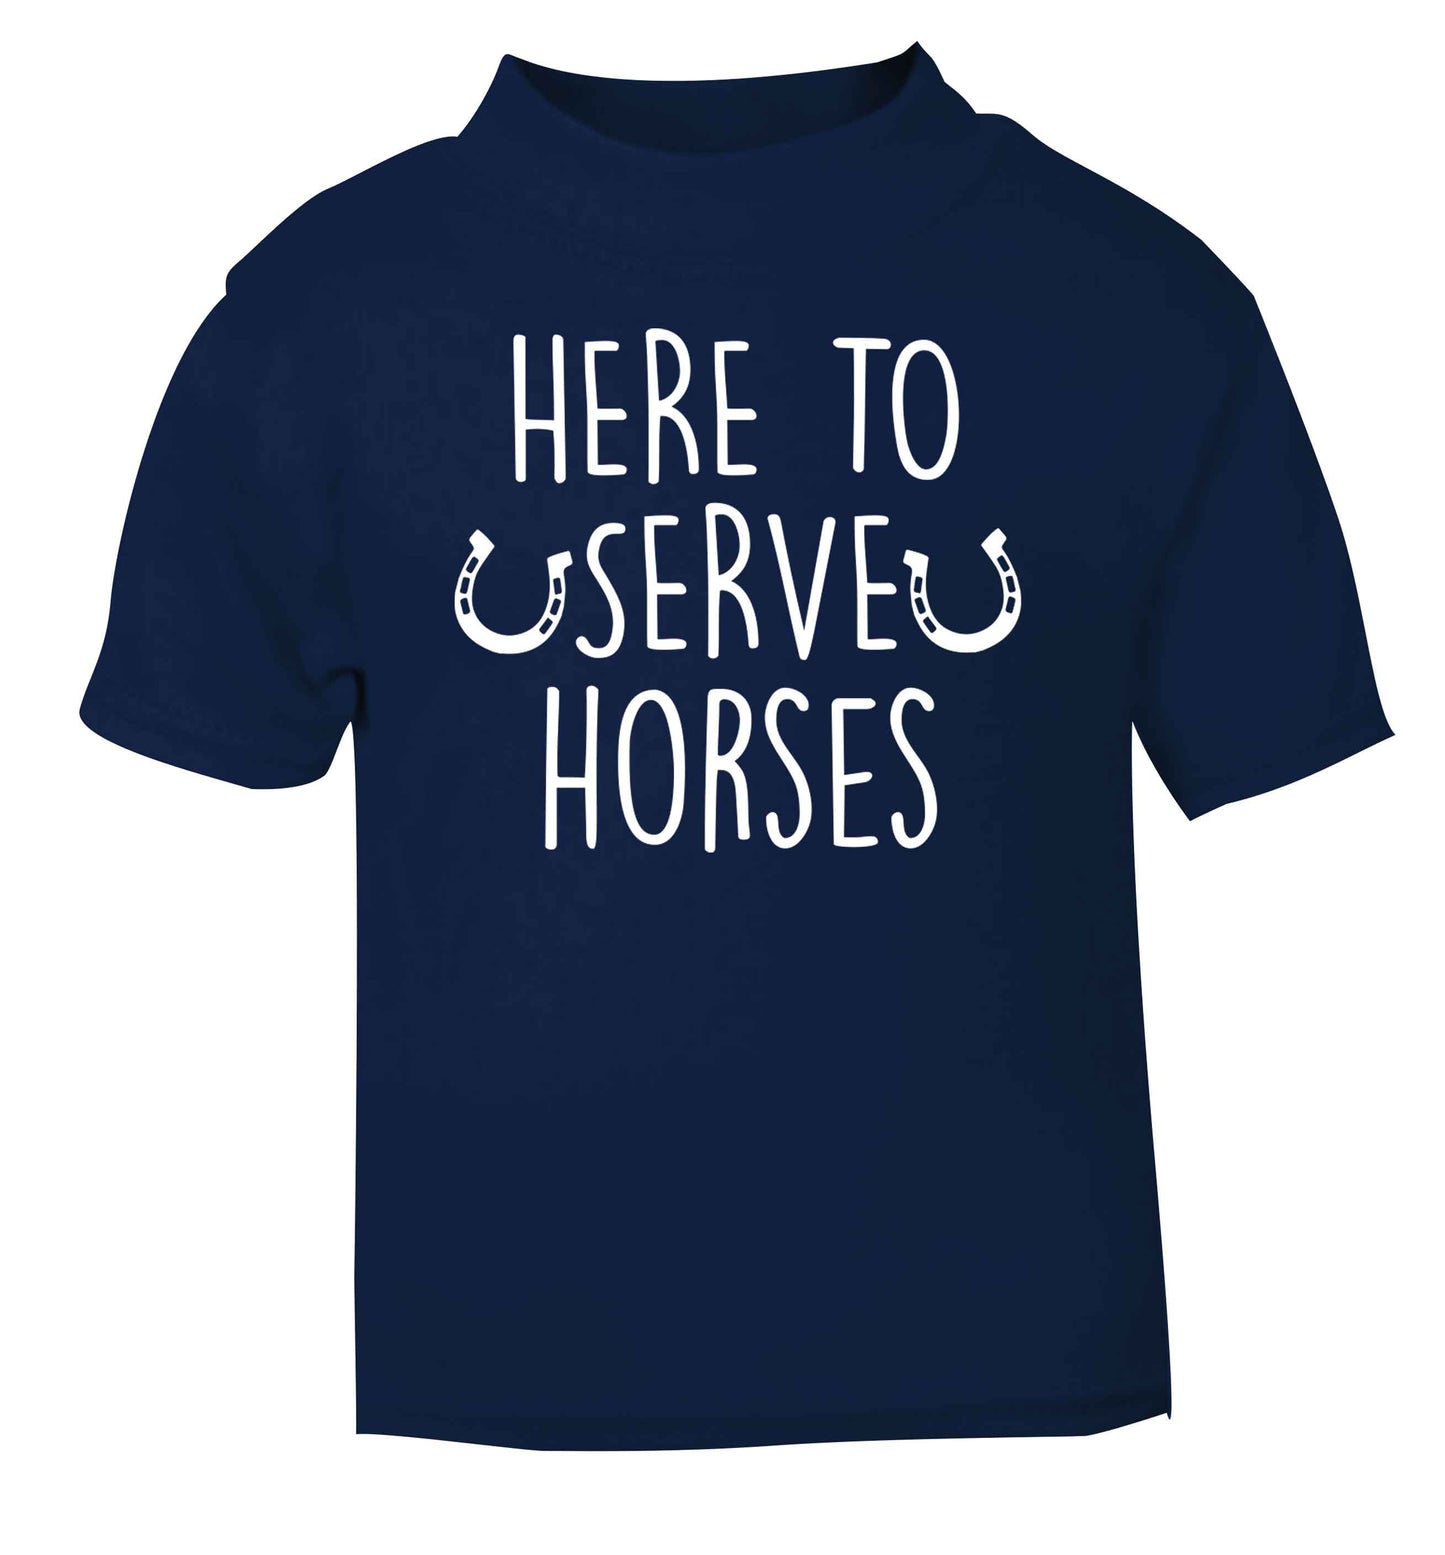 Here to serve horses navy baby toddler Tshirt 2 Years